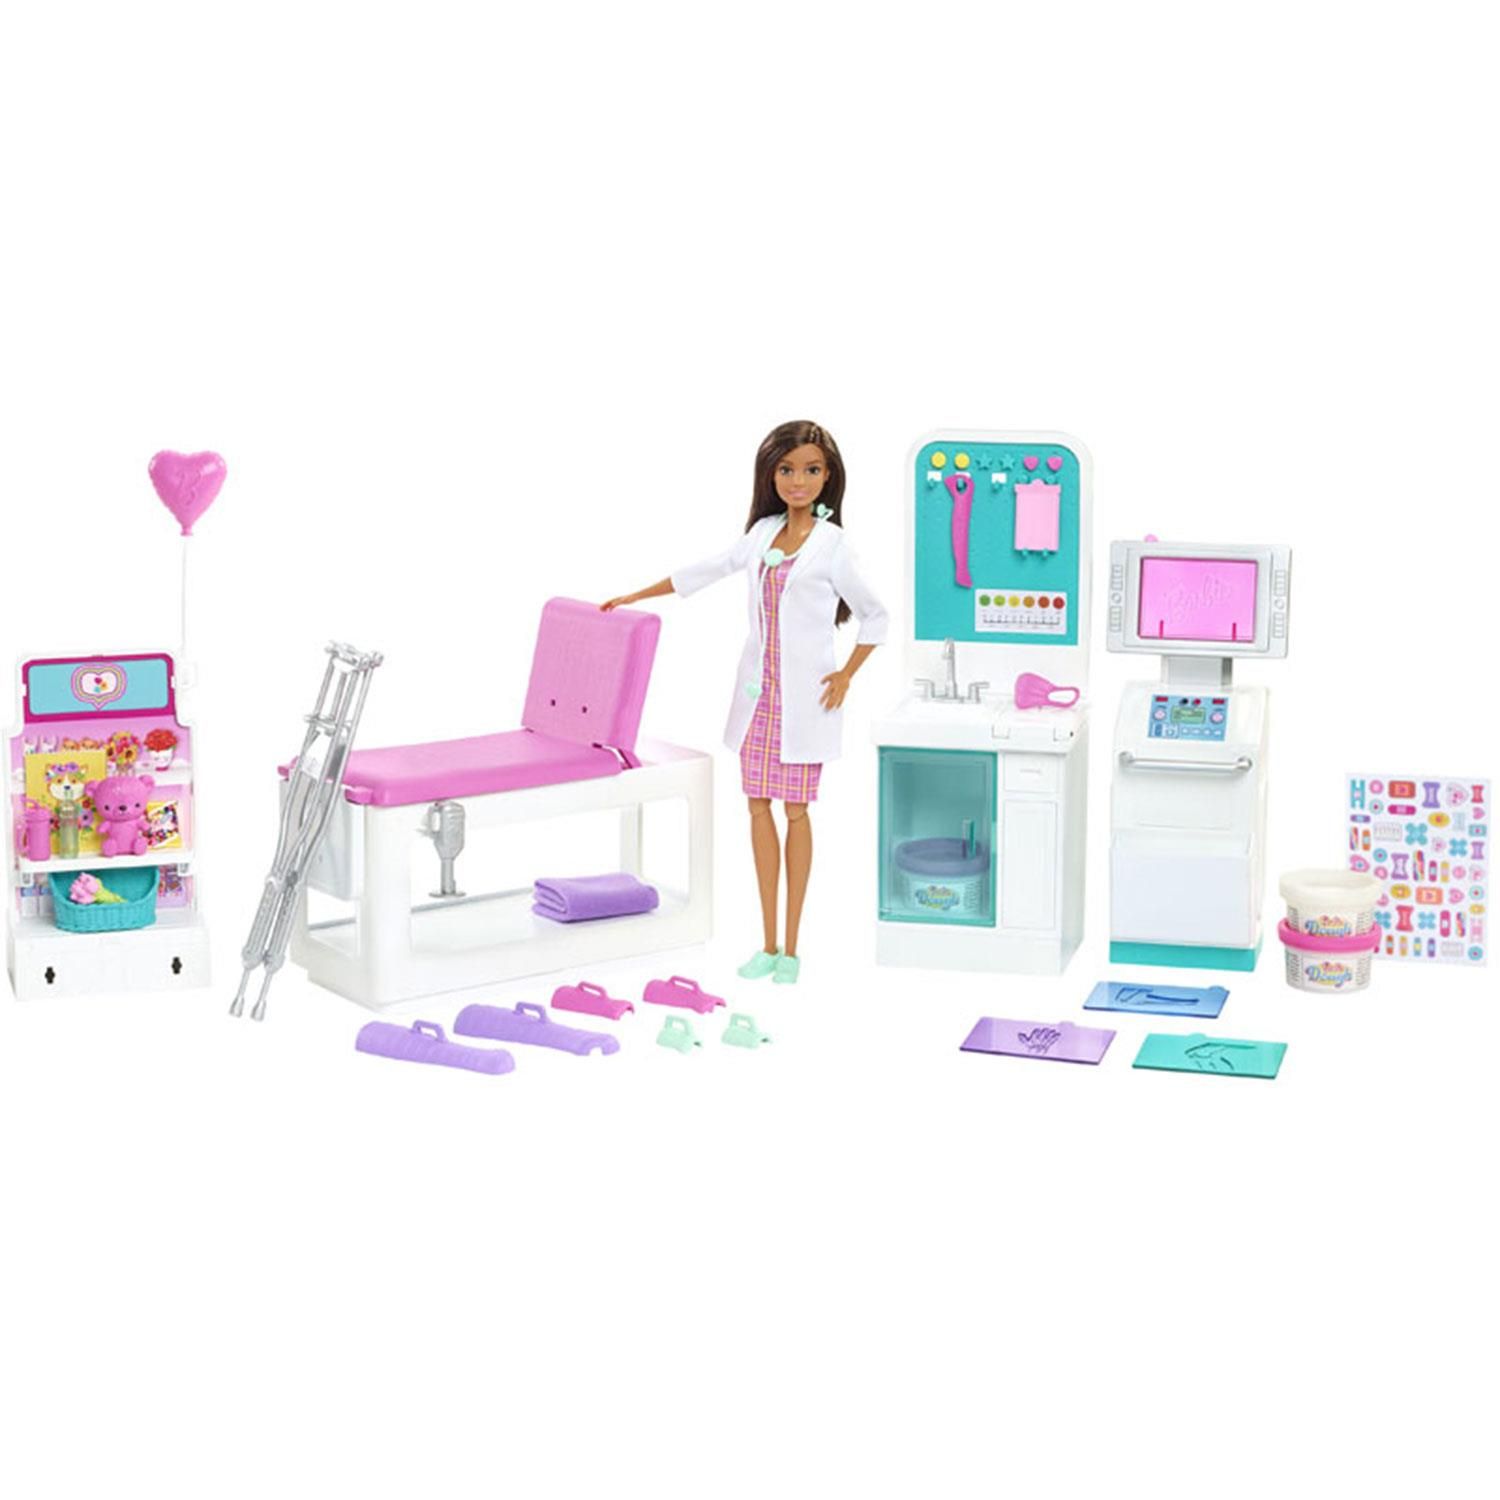 Kids can have all sorts of medicine-themed fun with the Barbie Fast Cast Clinic playset! This playset features a brunette Barbie doctor doll and four play areas - medical station, exam table, X-ray machine, and gift shop - for kids to create their own doctor-patient stories! Kids can make colorful casts for their Barbie doll patients (sold separately) with the cast-making feature. This Barbie playset includes 30+ toy accessories and pieces, including dough containers, crutches, stickers, and more! Makes an excellent gift for kids aged 3+.

​Explore a world of taking care of others with the Barbie Fast Cast Clinic playset
​Wearing a cute plaid dress, white doctor's coat, and sporting a stethoscope and clipboard, the Barbie doctor doll (12-in/30.40-cm) is ready to take care of patients
​Barbie doctor doll can prepare at her medical station, take X-rays and check patients on the exam table
​When she determines a patient has a broken arm or leg, she can make a pink, purple, or white cast with the dough and cast-making accessories! There are also stickers to decorate the patient's cast
​Barbie doctor doll can also use dough in the bandage-making station to create a wrap for her patient injuries as well!
​When she determines a patient has a broken arm or leg, she can make a pink, purple, or white cast with the dough and cast-making accessories! There are also stickers to decorate the patient's cast
​Some of the accessories feature a clip so Barbie doctor doll can hold them for even more realistic play
​Makes a great gift for kids 3 years old and up, especially those interested in the medical field and helping others

Box Contains:
1x Barbie Fast Cast Clinic Playset with Brunette Barbie Doctor Doll
4x Play Areas
30x Play Pieces including dough containers, crutches, stickers, and more